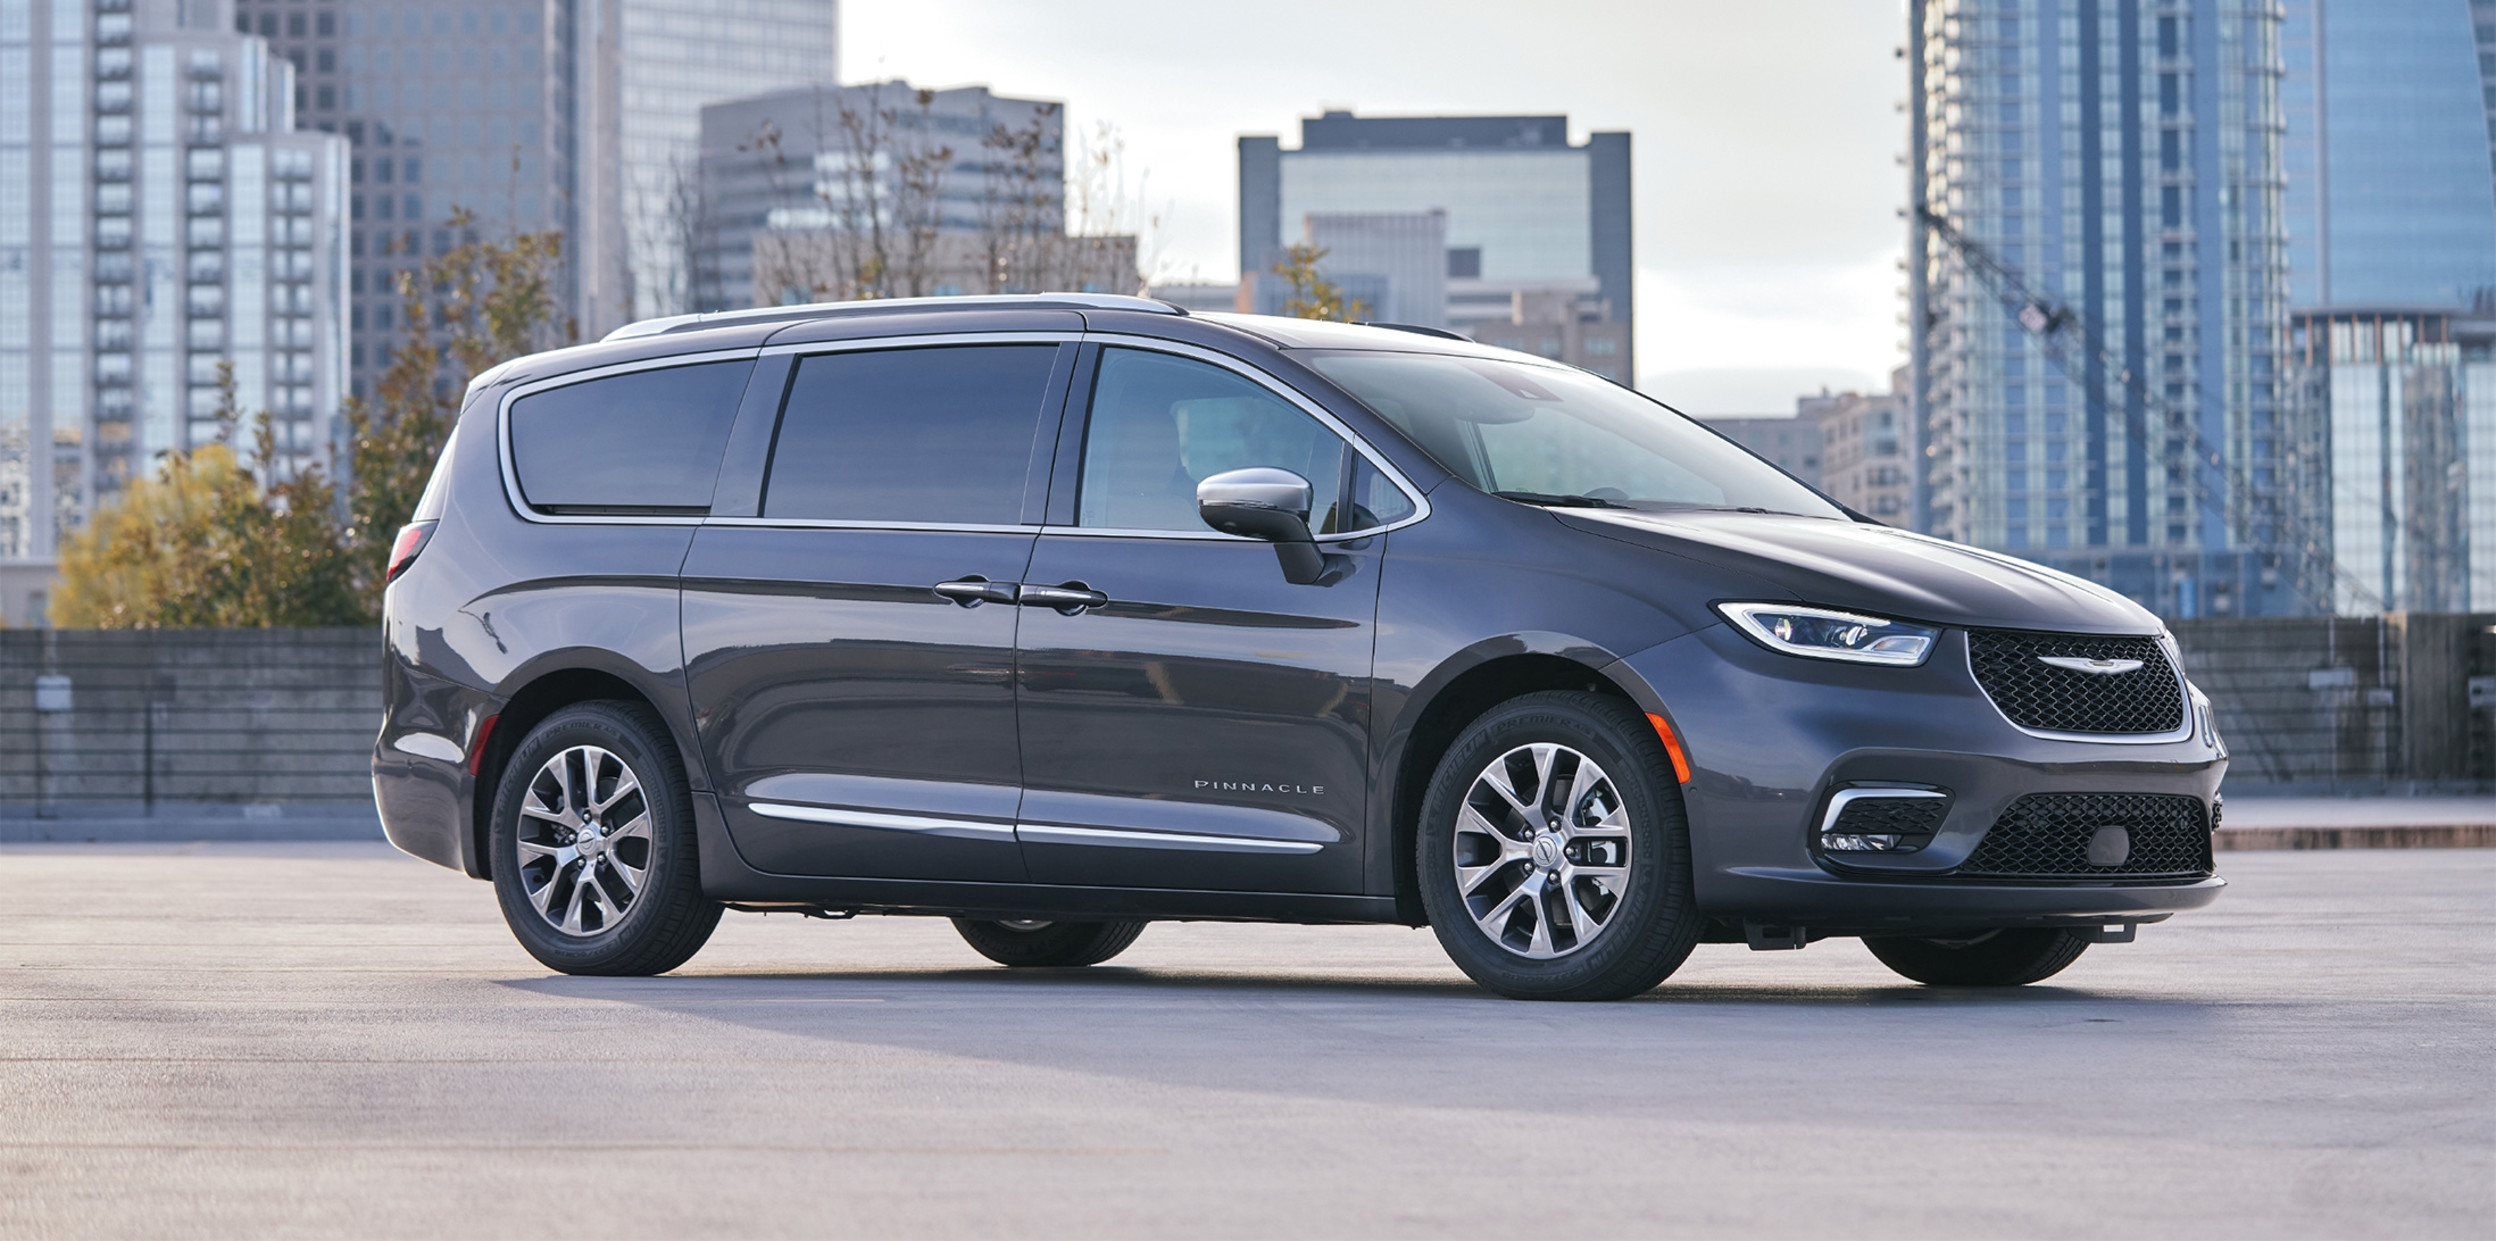 2020 Chrysler Pacifica and Pacifica Hybrid Get Big Updates and